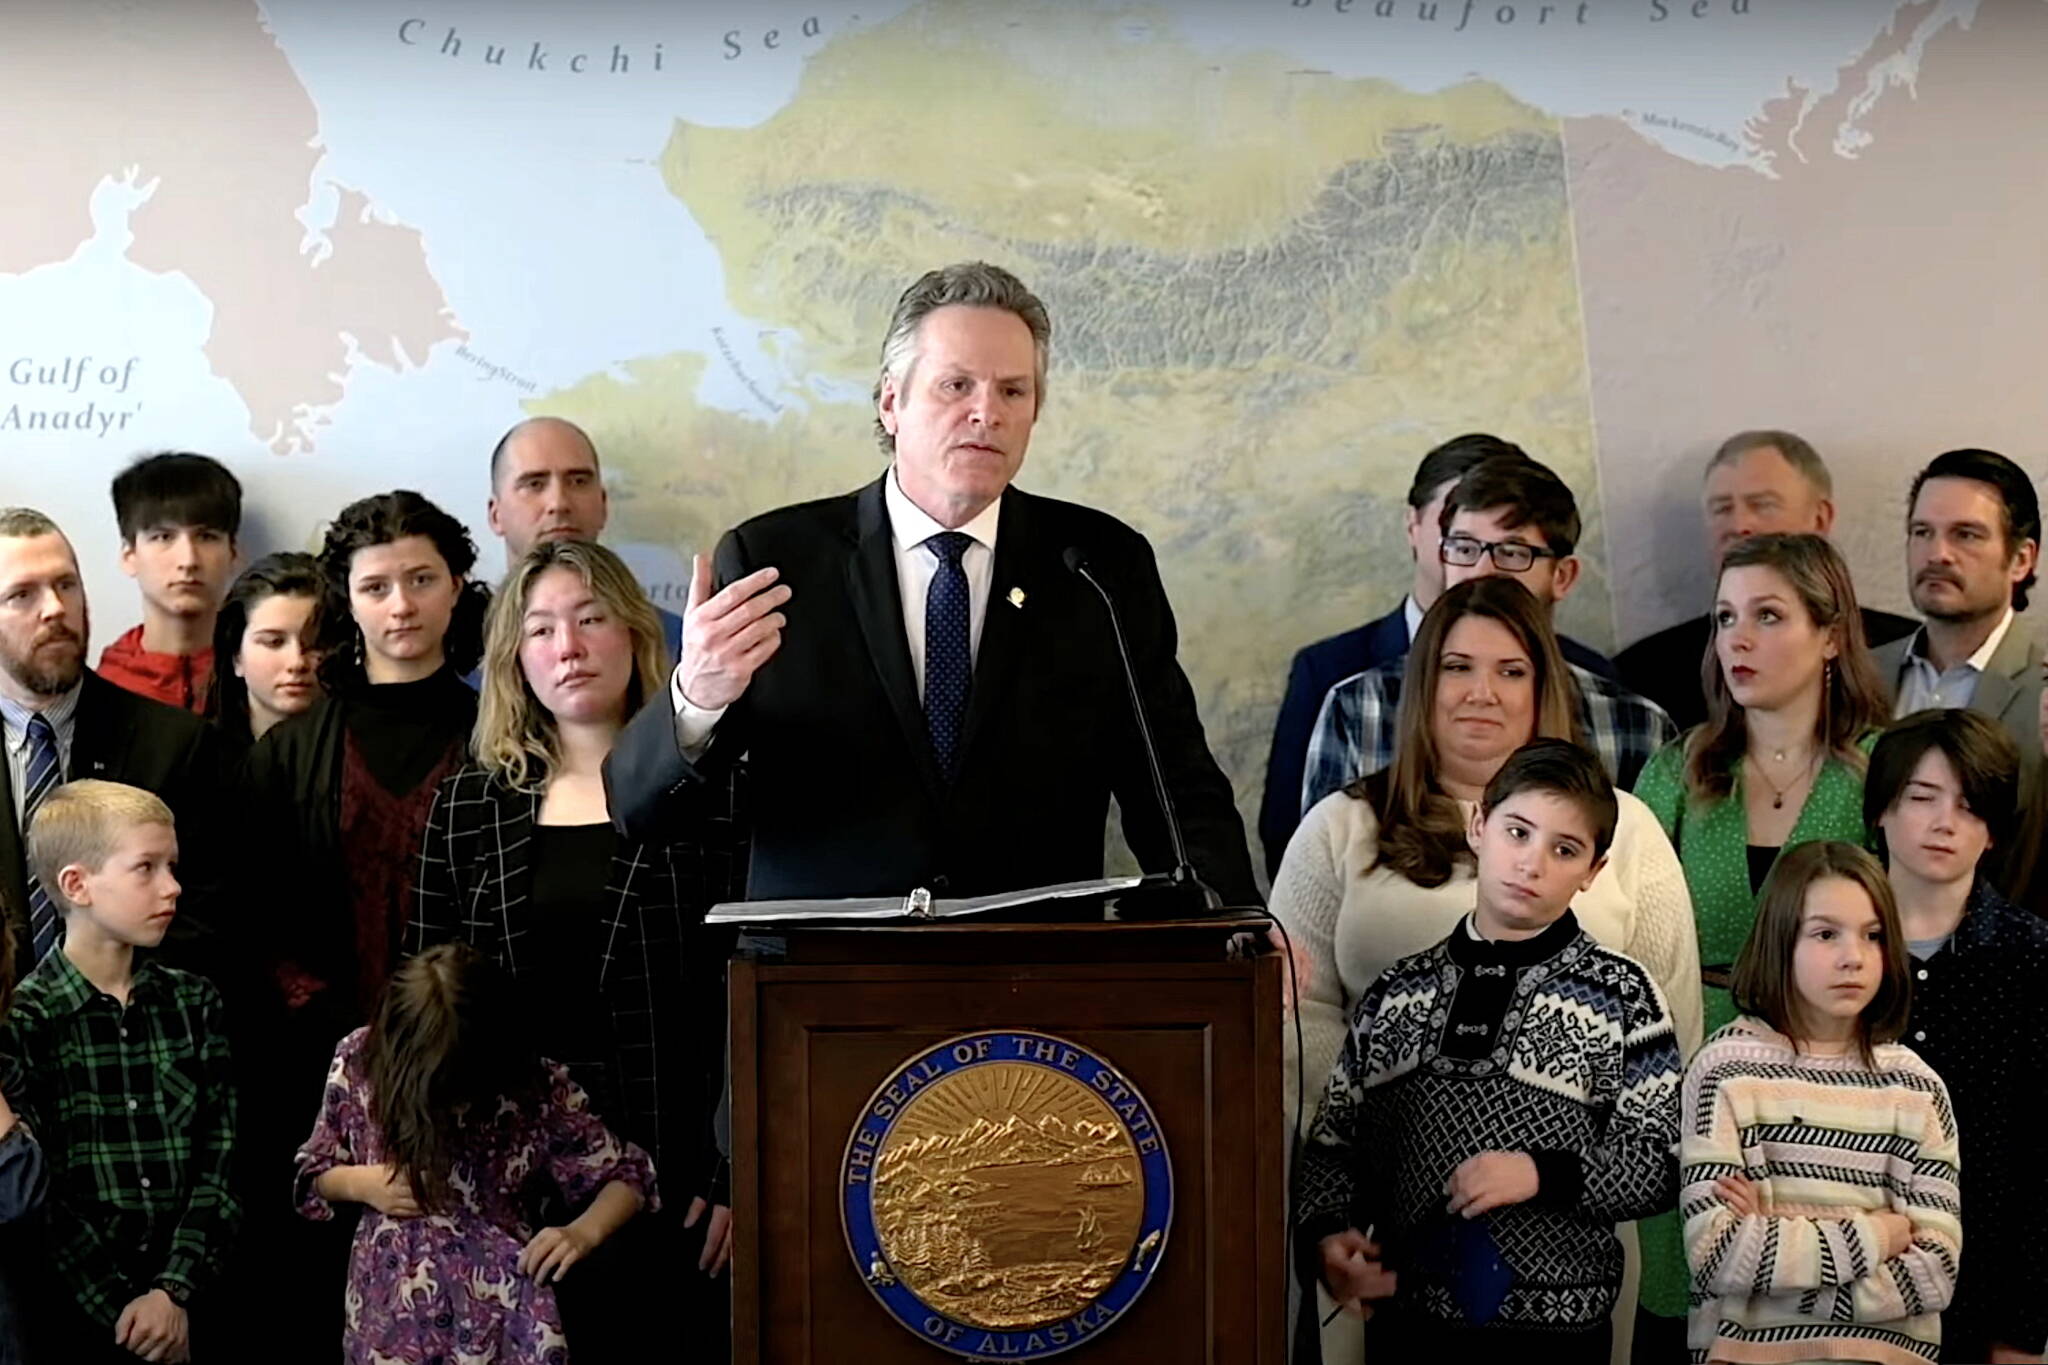 Screenshot from official livestream 
Gov. Mike Dunleavy unveils proposals to offer public school teachers annual retention bonuses and enact policies similar so-called “don’t say gay” laws in states such as Florida during a press conference in Anchorage on Tuesday.